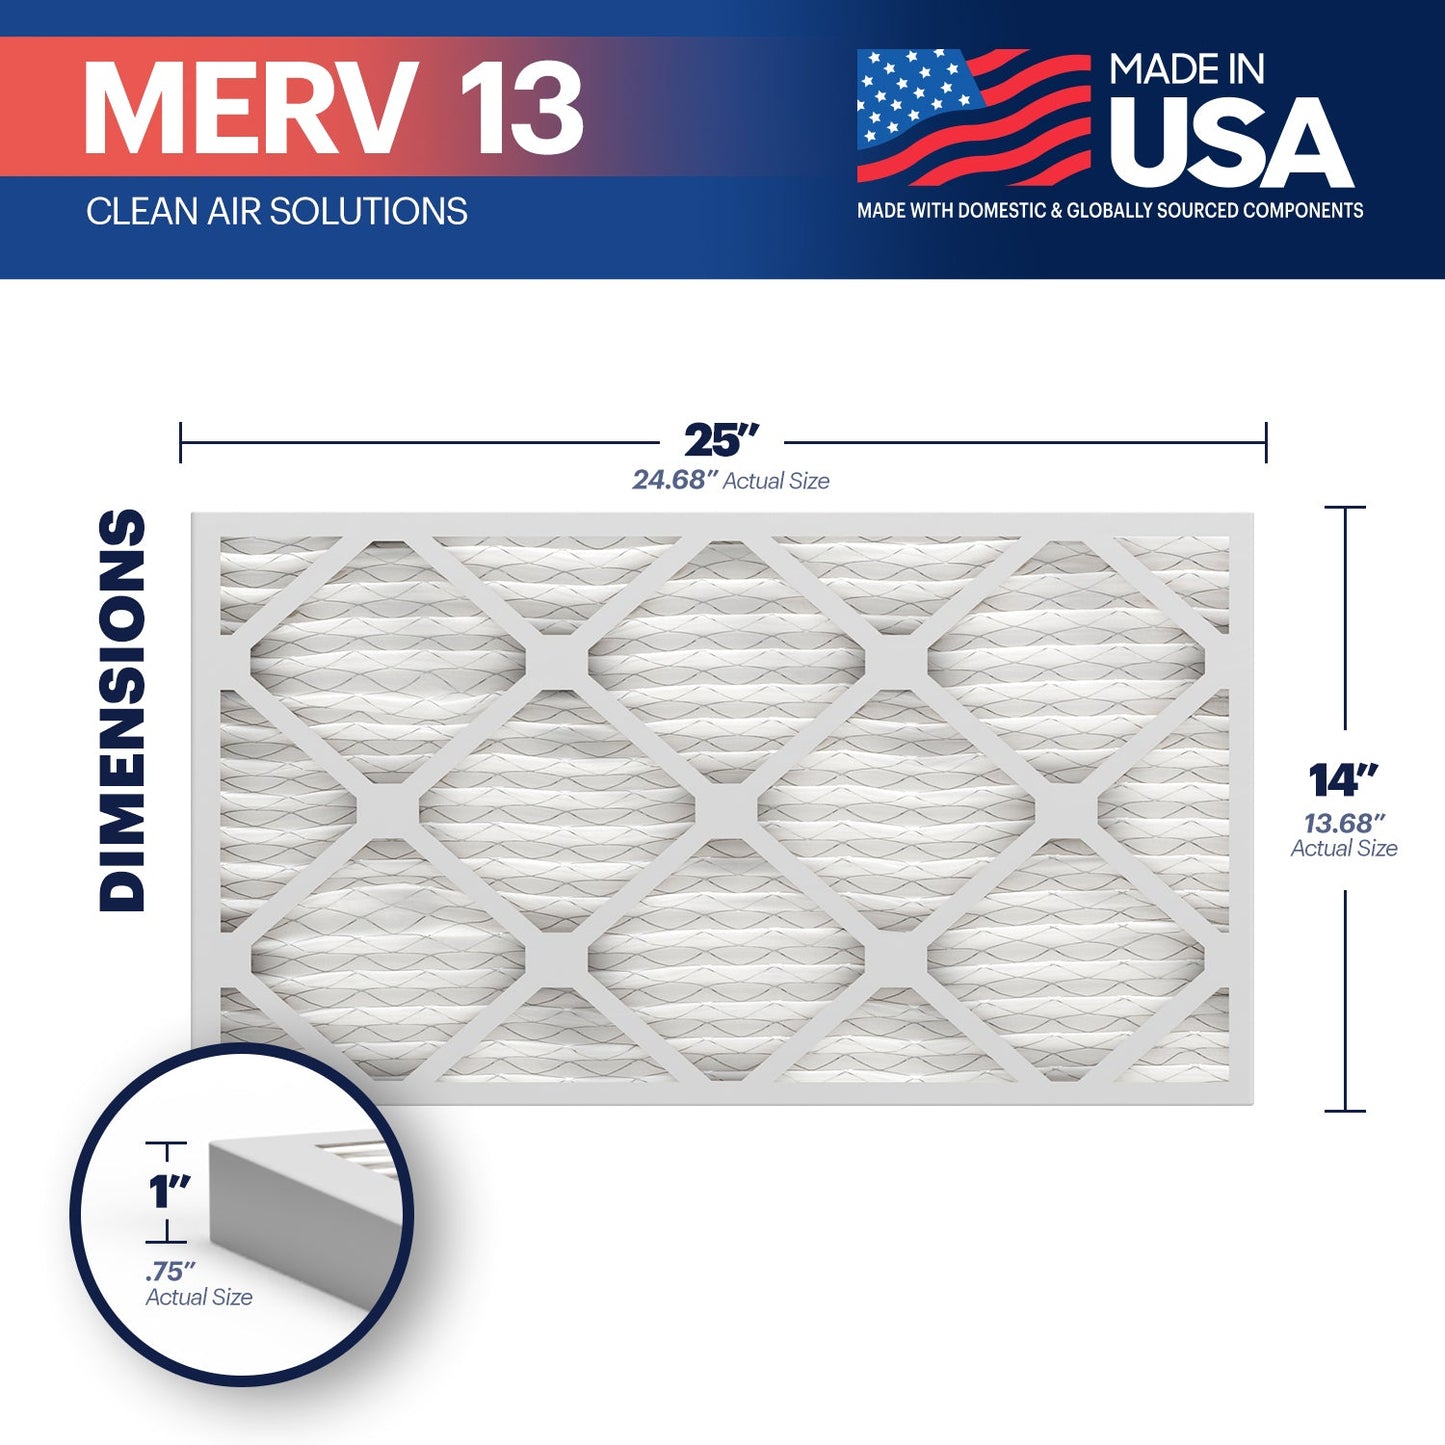 BNX TruFilter 14x25x1 MERV 13 Pleated Air Filter – Made in USA (6-Pack)